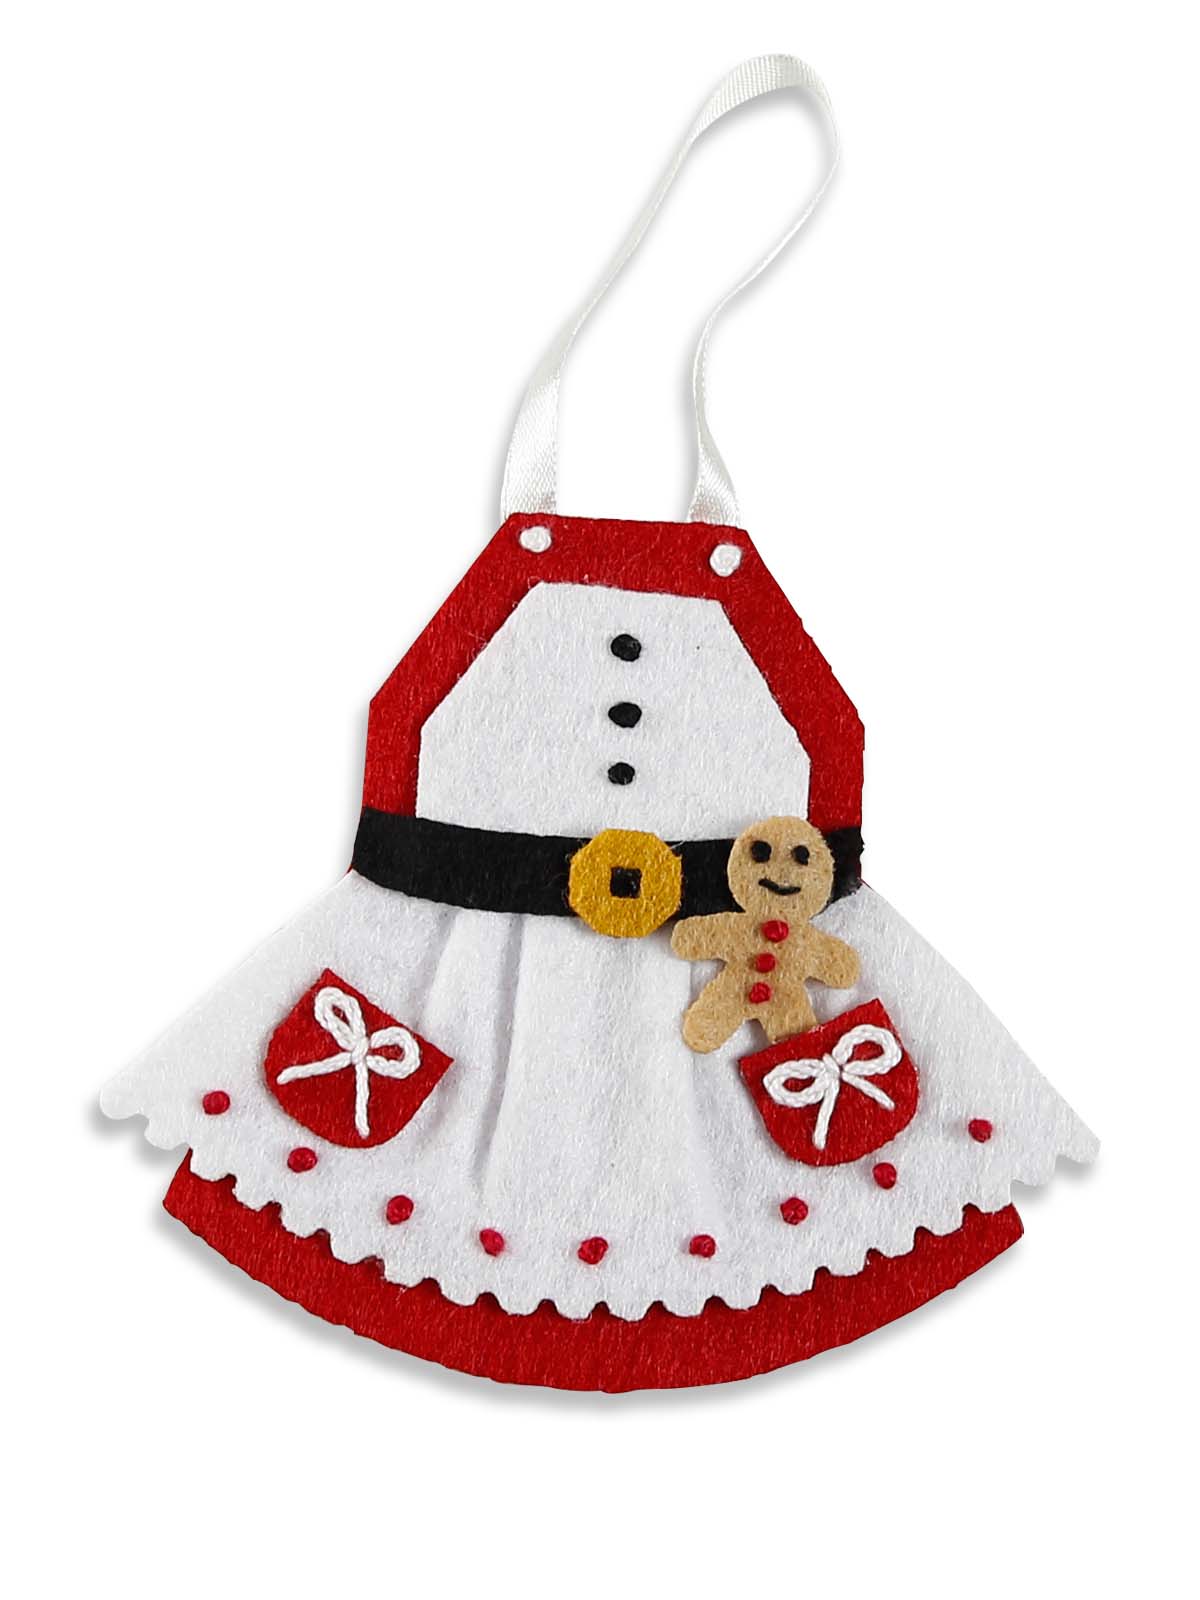 Crafters Collection F003 - Mrs. Clause's Apron